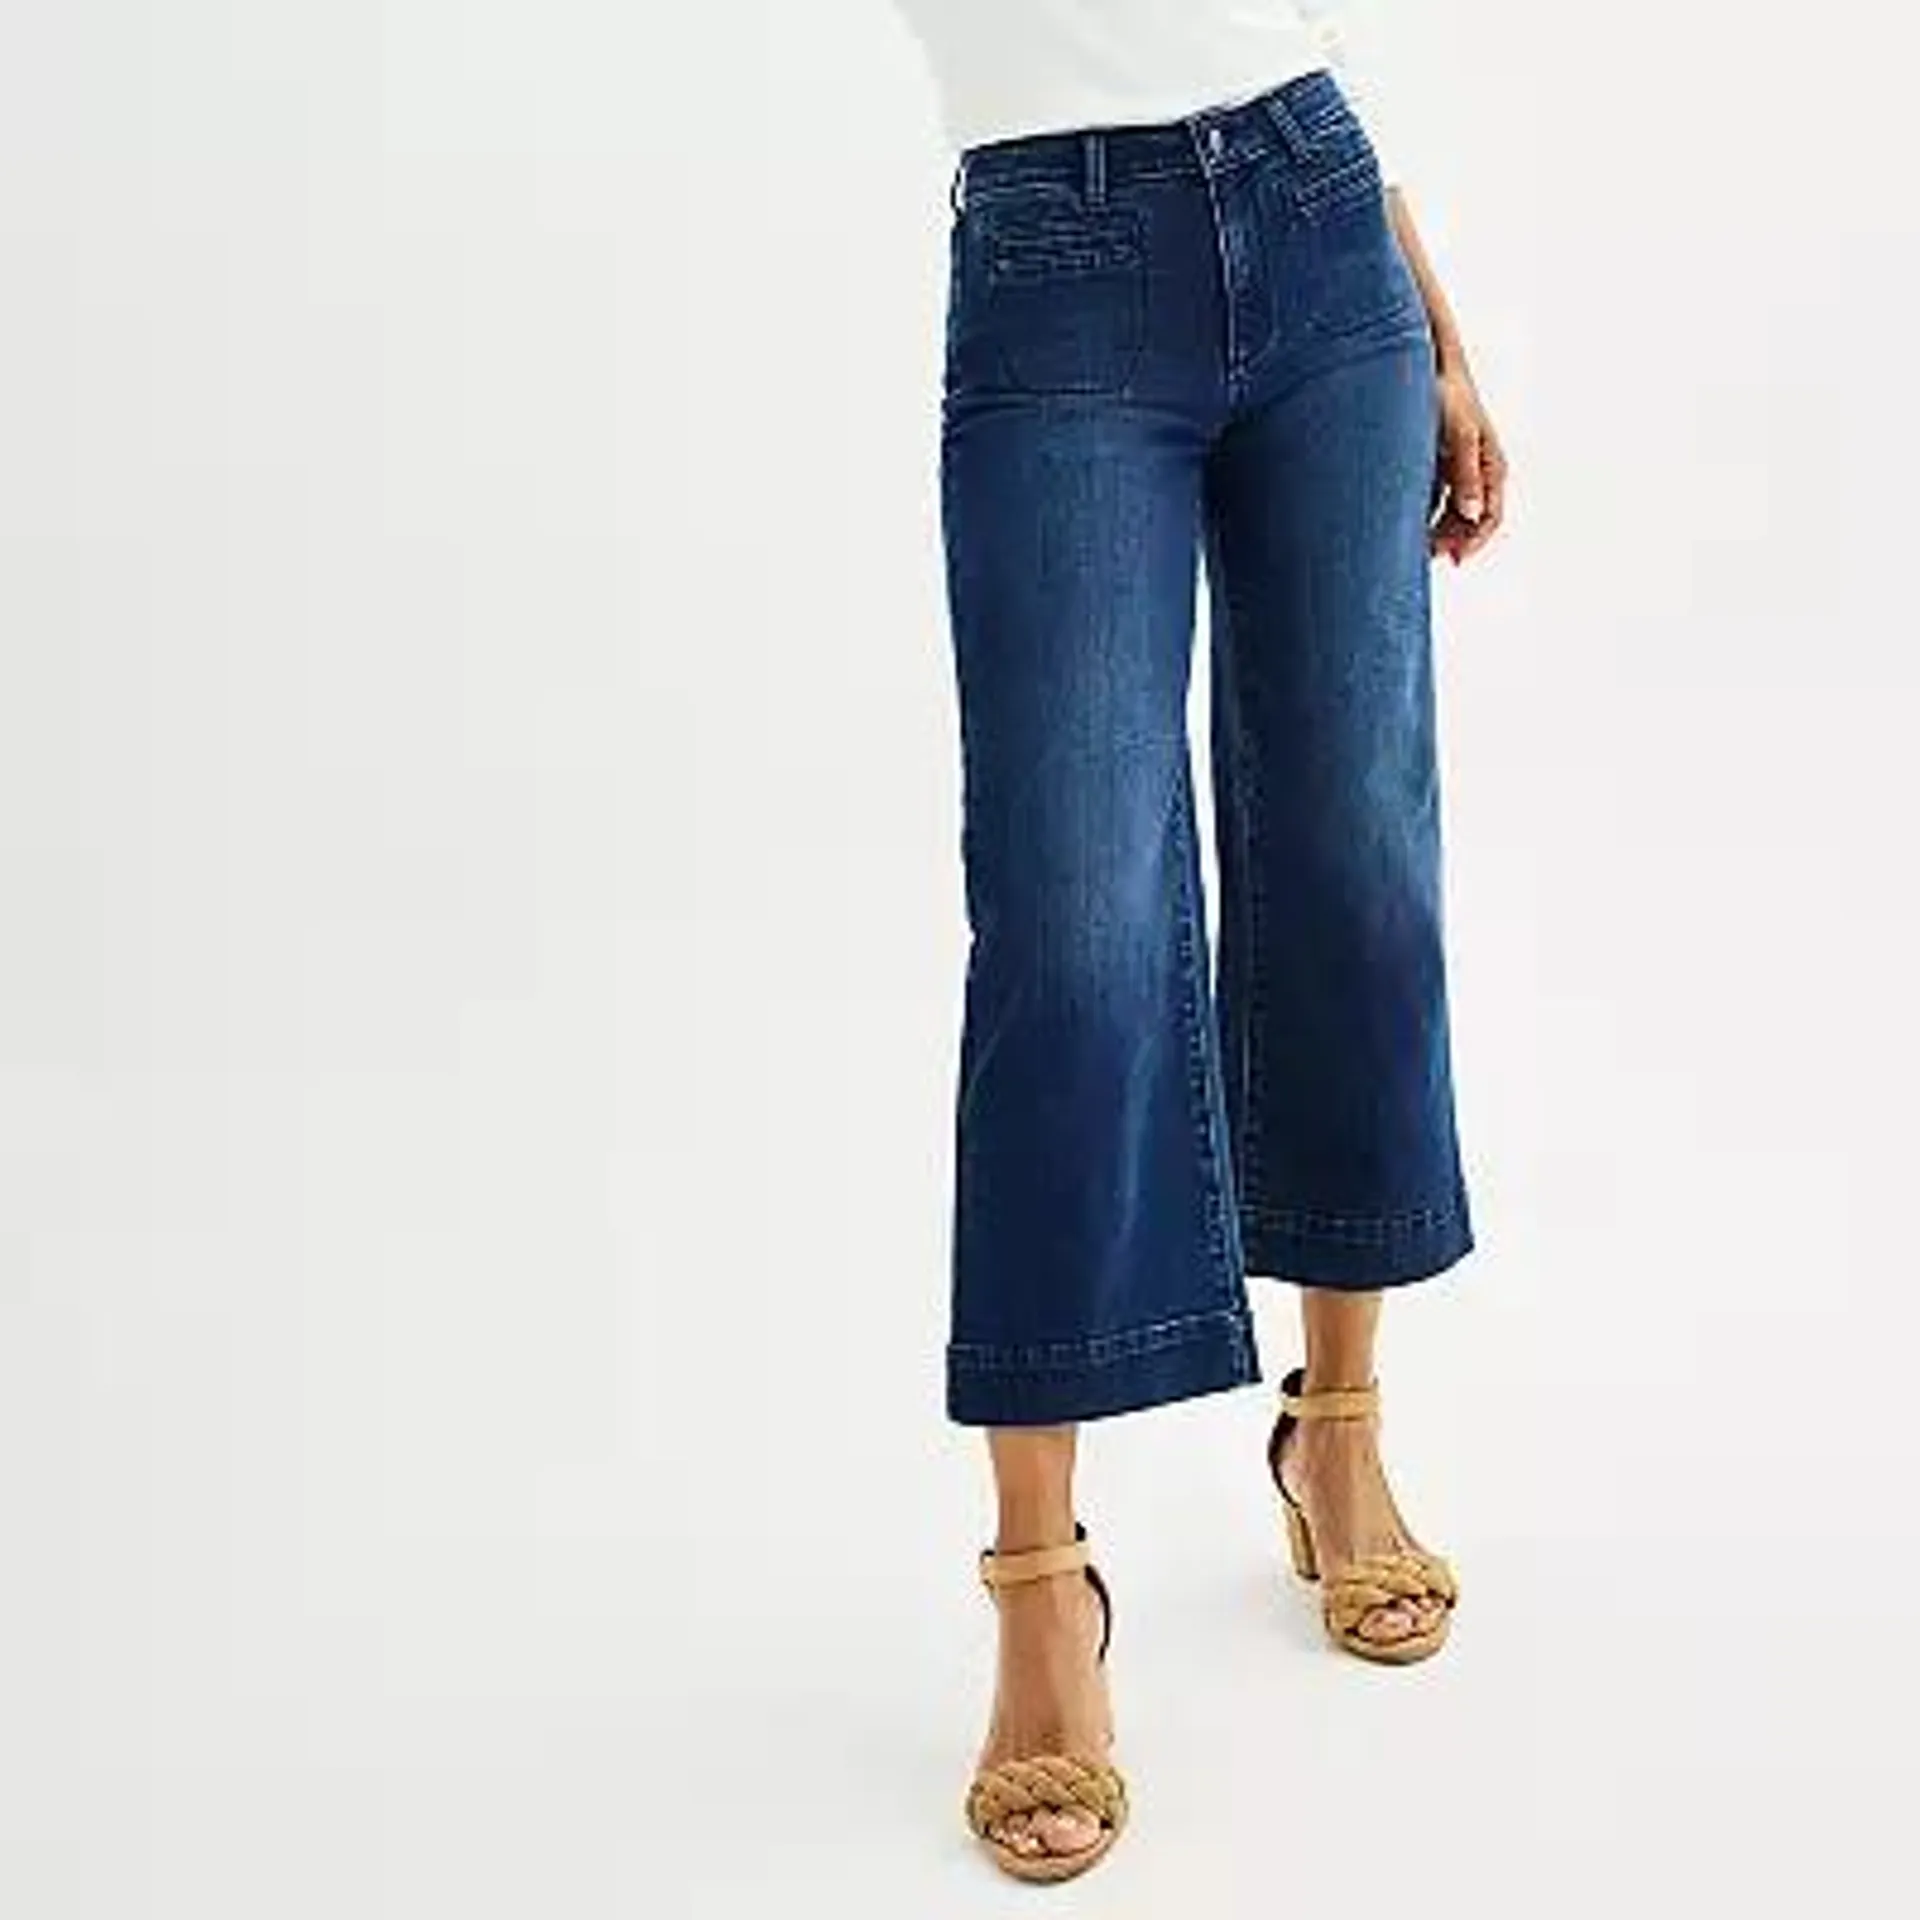 Women's Sonoma Goods For Life® Wide-Leg Ankle Jeans